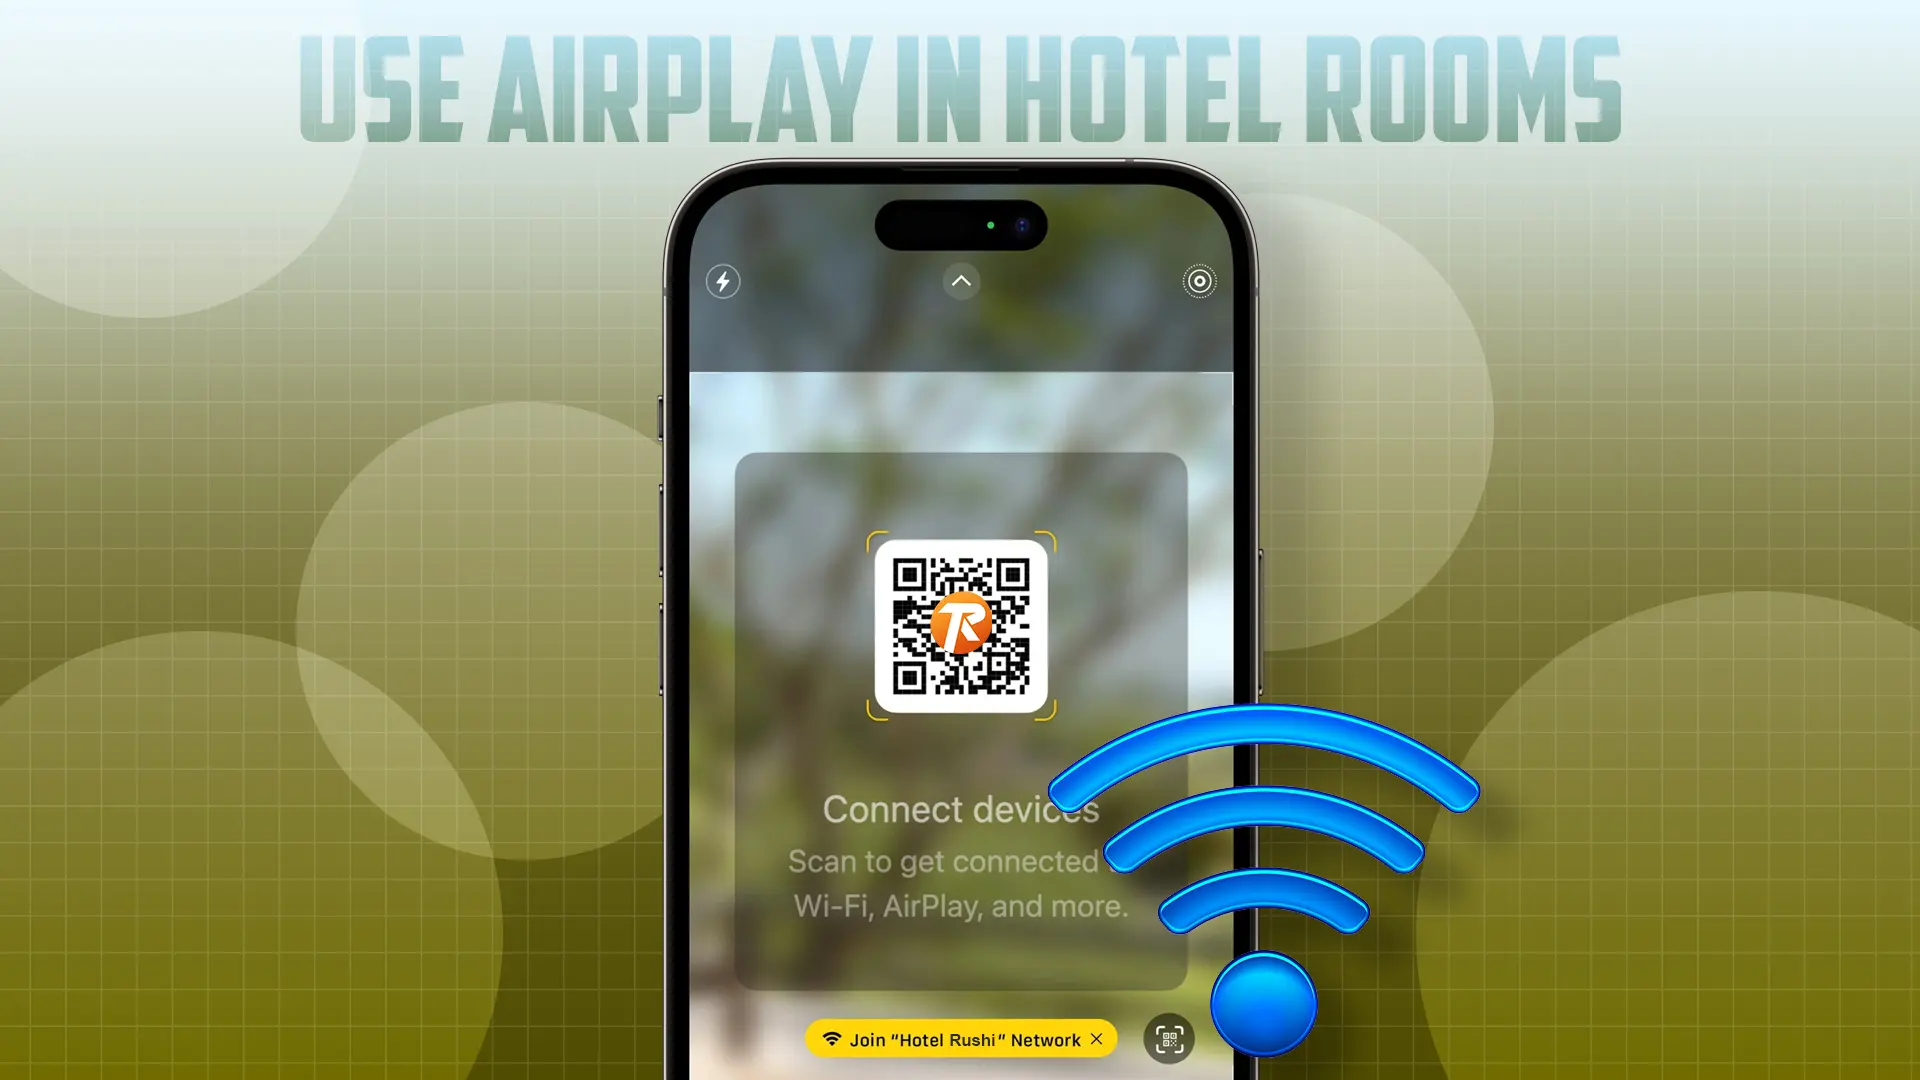 Use AirPlay in Hotel Rooms From iPhone